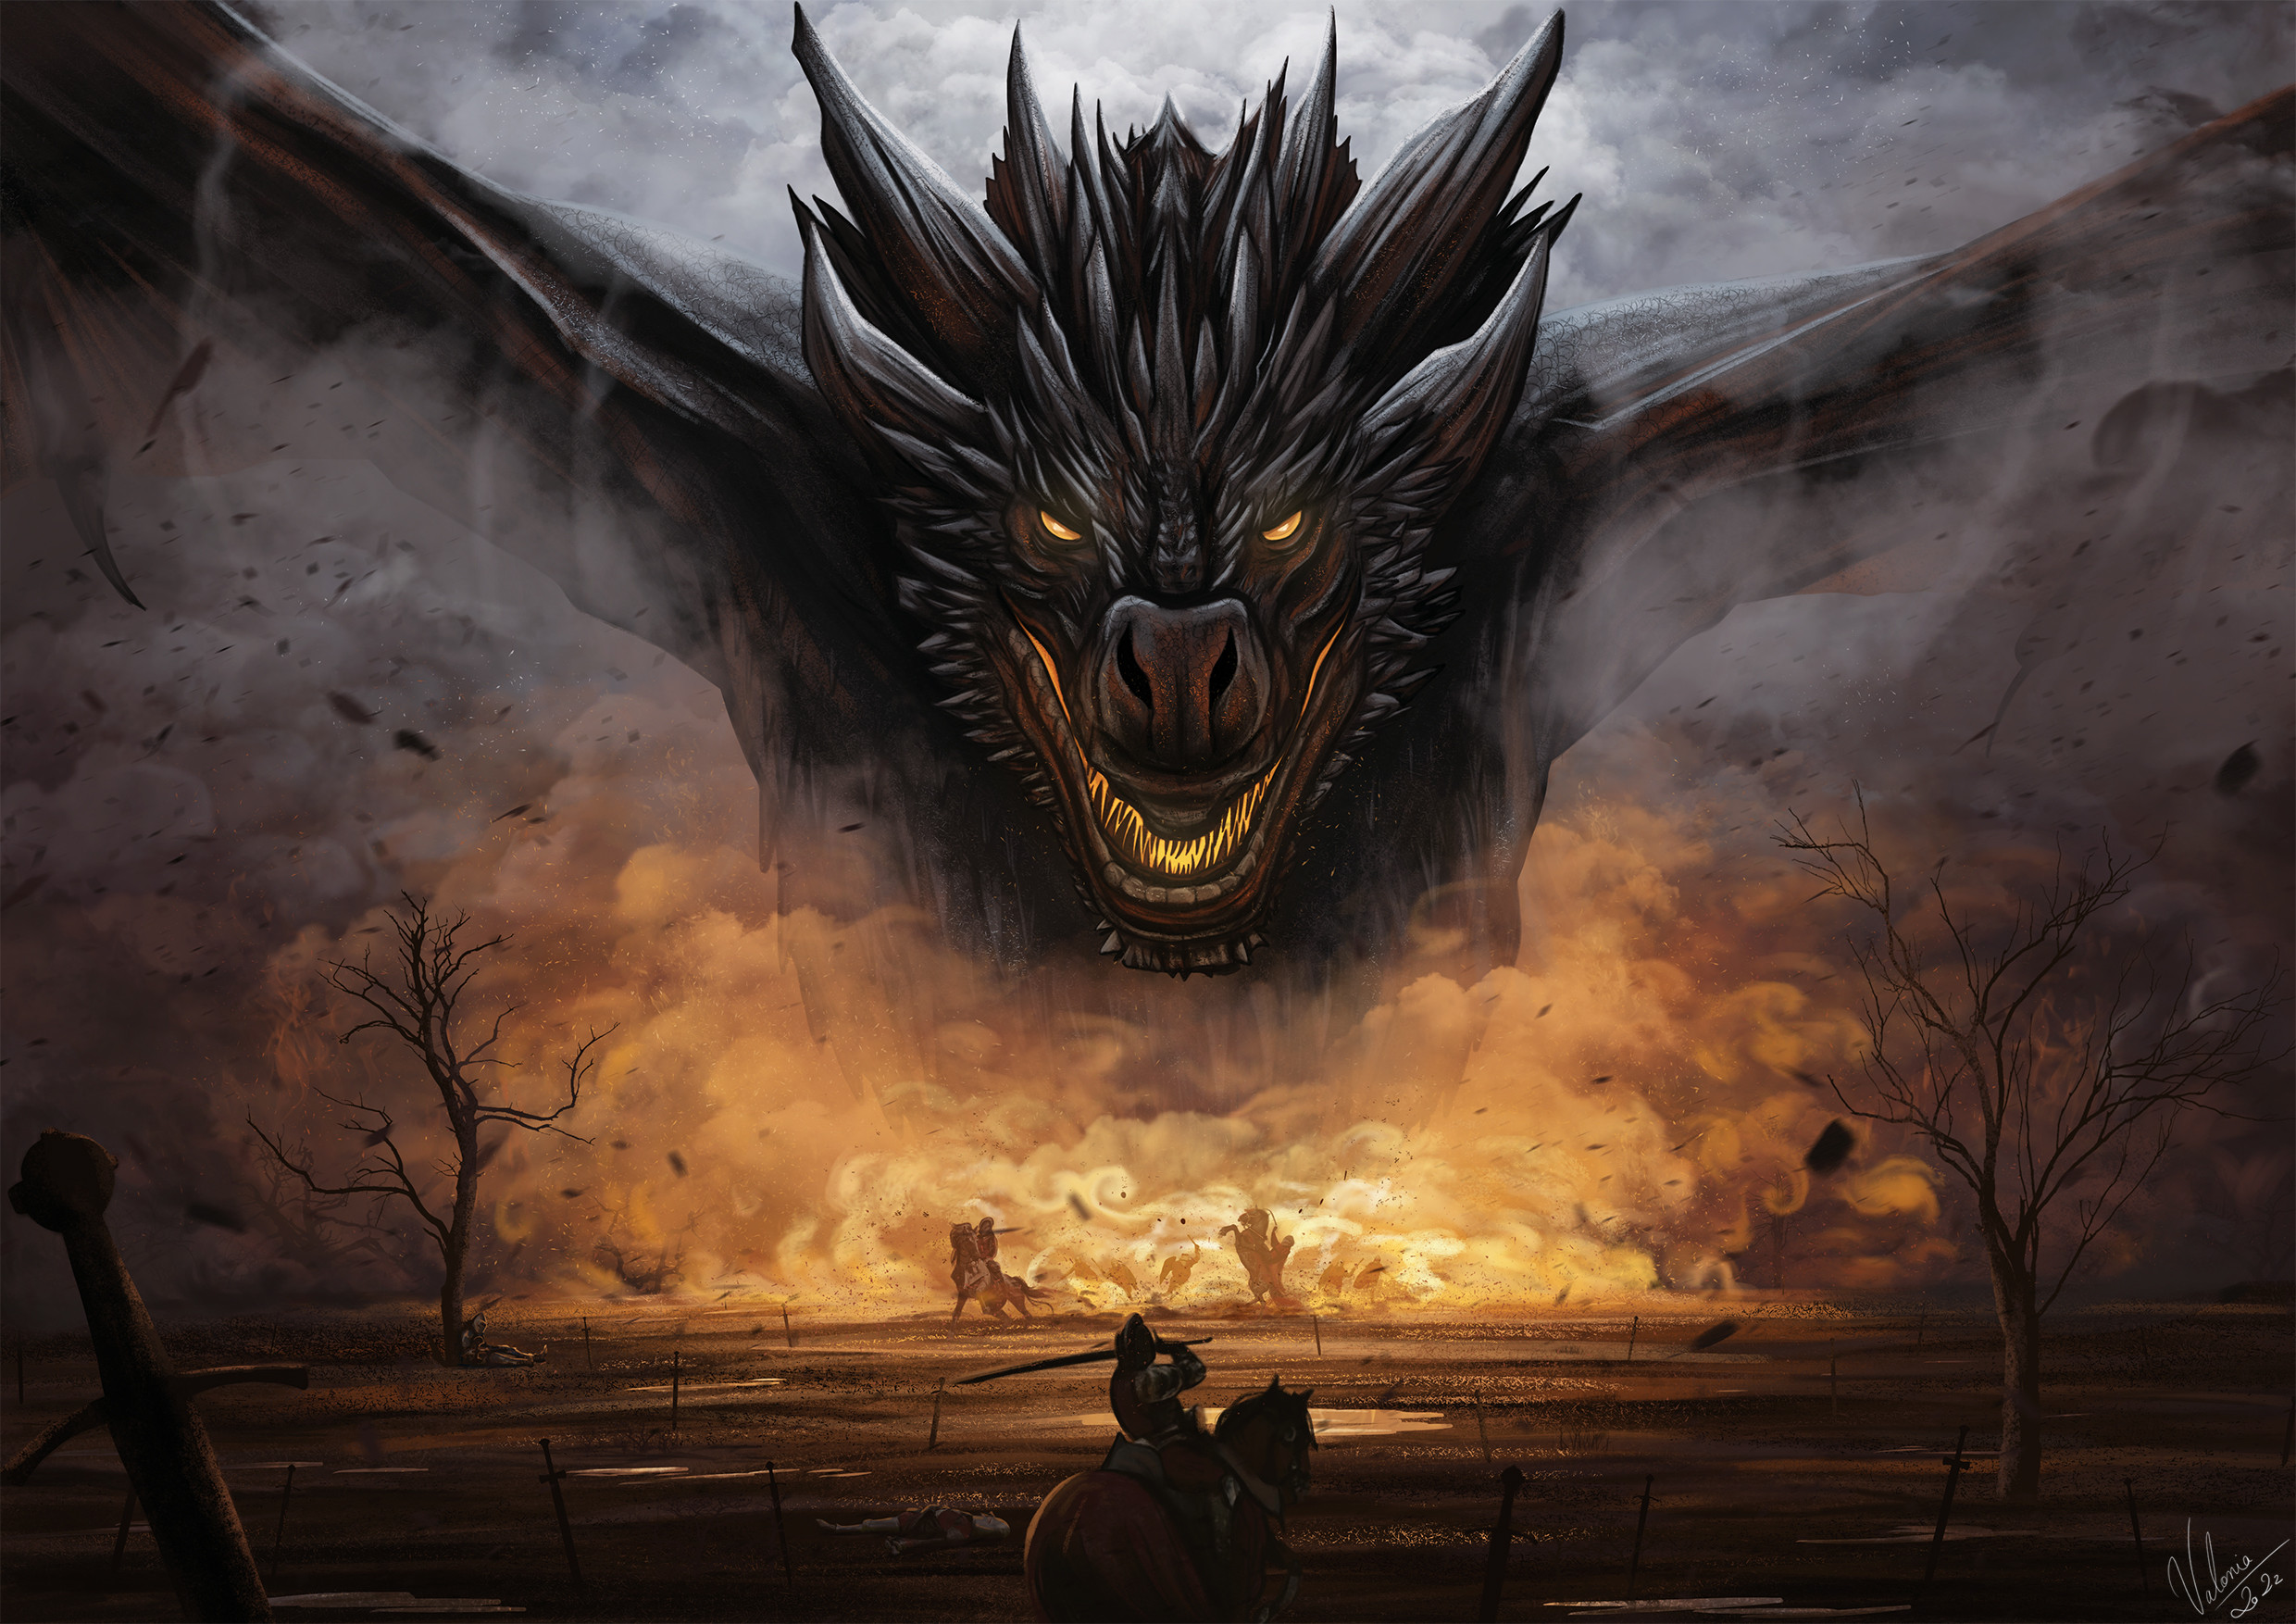 Game of thrones : Drogon by Margaux Valonia Butet